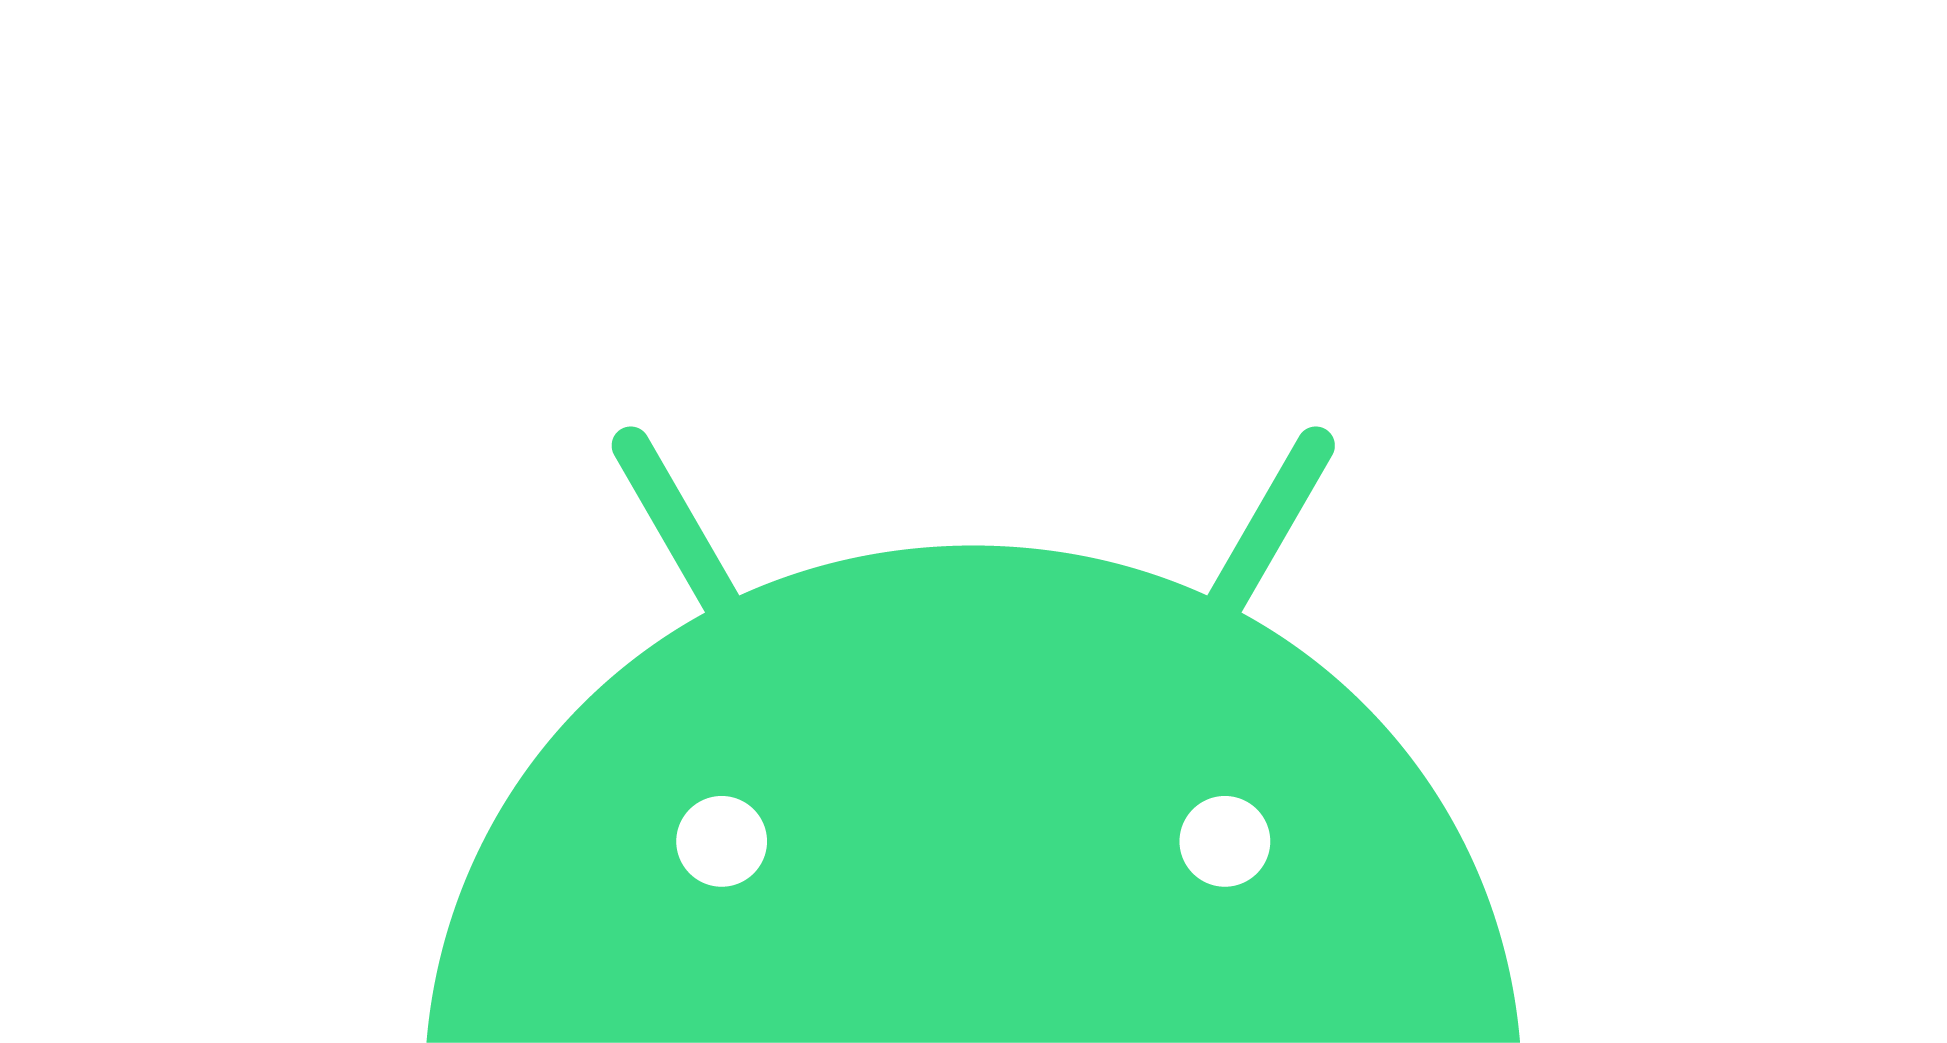 android.com